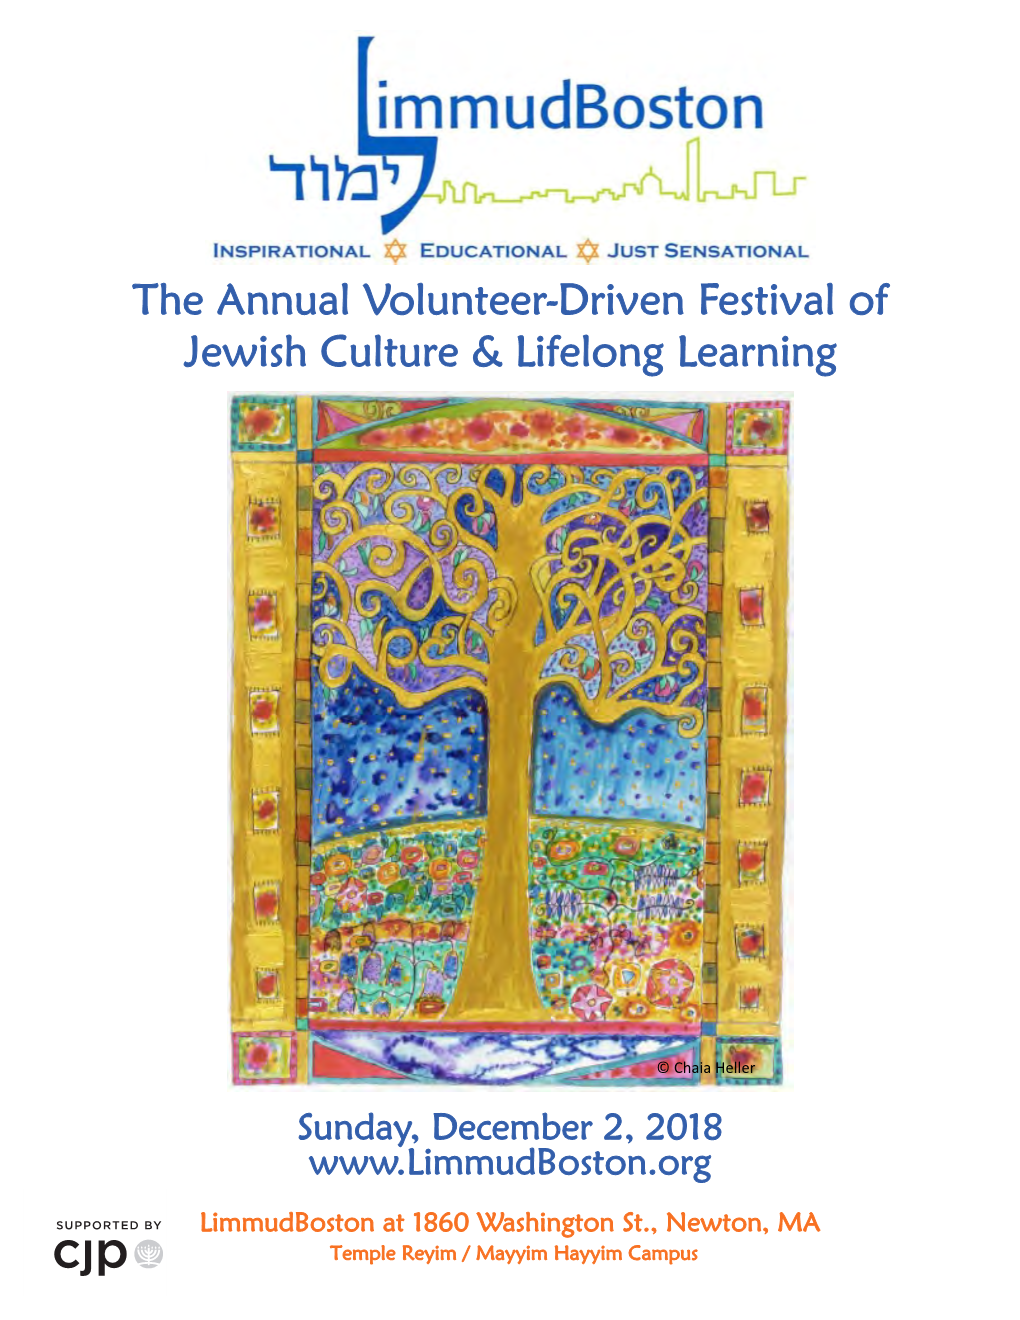 The Annual Volunteer-Driven Festival of Jewish Culture & Lifelong Learning